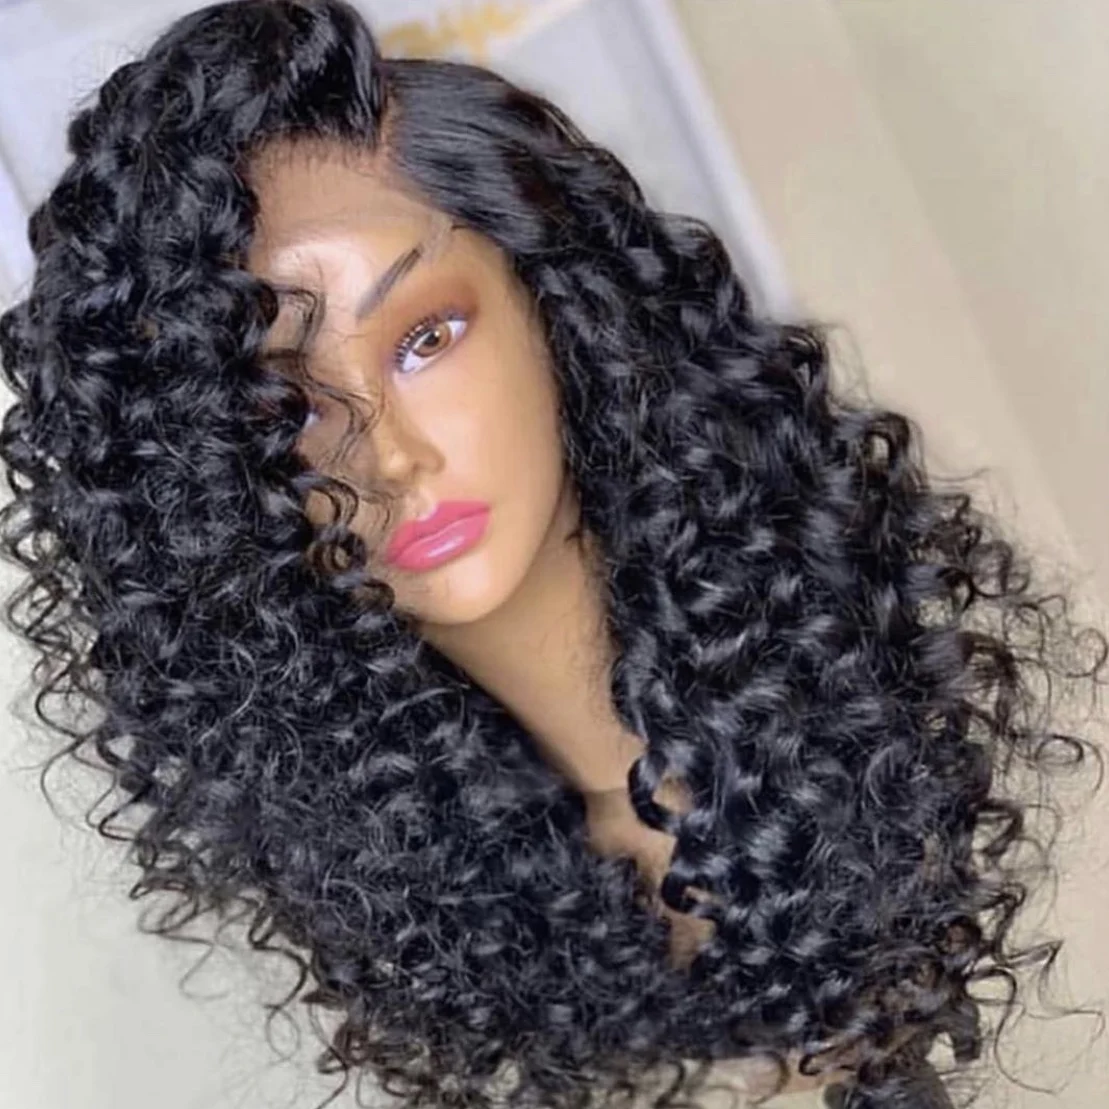 

Fake Scalp Human Hair Wig 13x6 Lace Front Wig Kinky Curly Indian Remy Hair Pre Plucked Bleached Knots for Black Women Deep Part